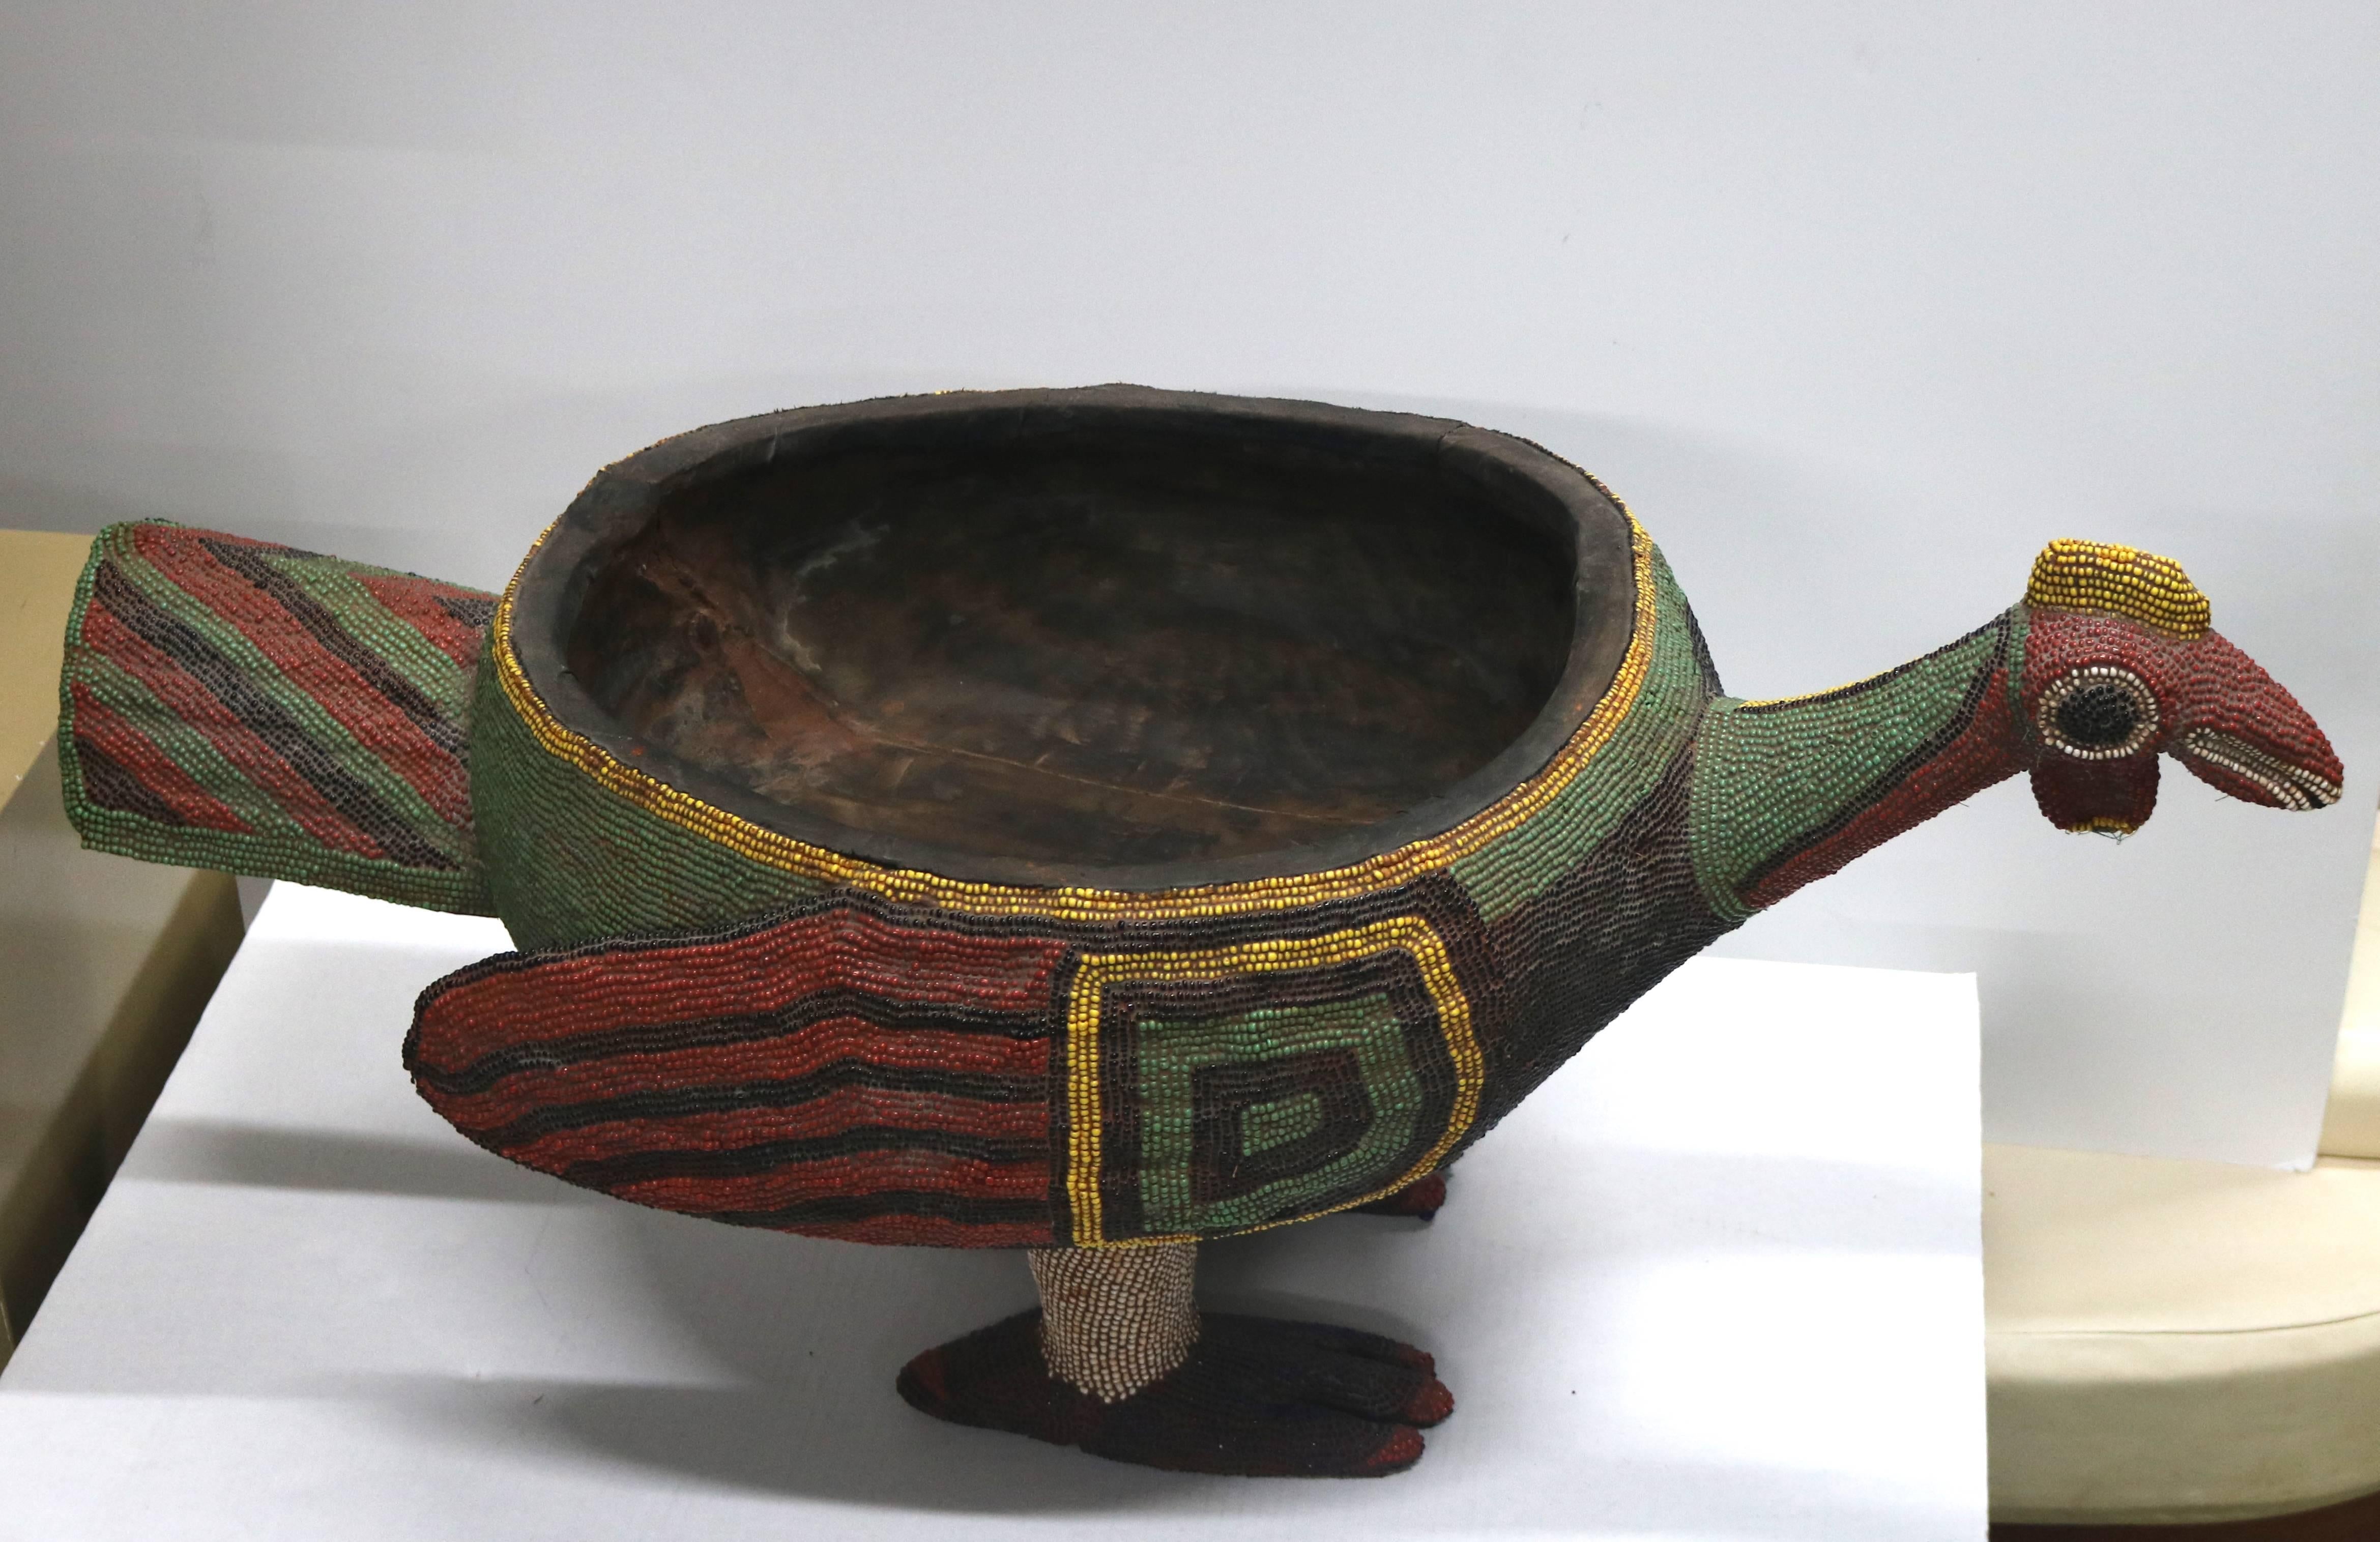 Mid-Century huge beaded wood bird bowl, a wood form bowl in the shape of a bird with colorful beaded design throughout the surface, most likely from Cameroon-Africa. A unique rarity!!
Colorful and fantastical would make a great centerpiece or center